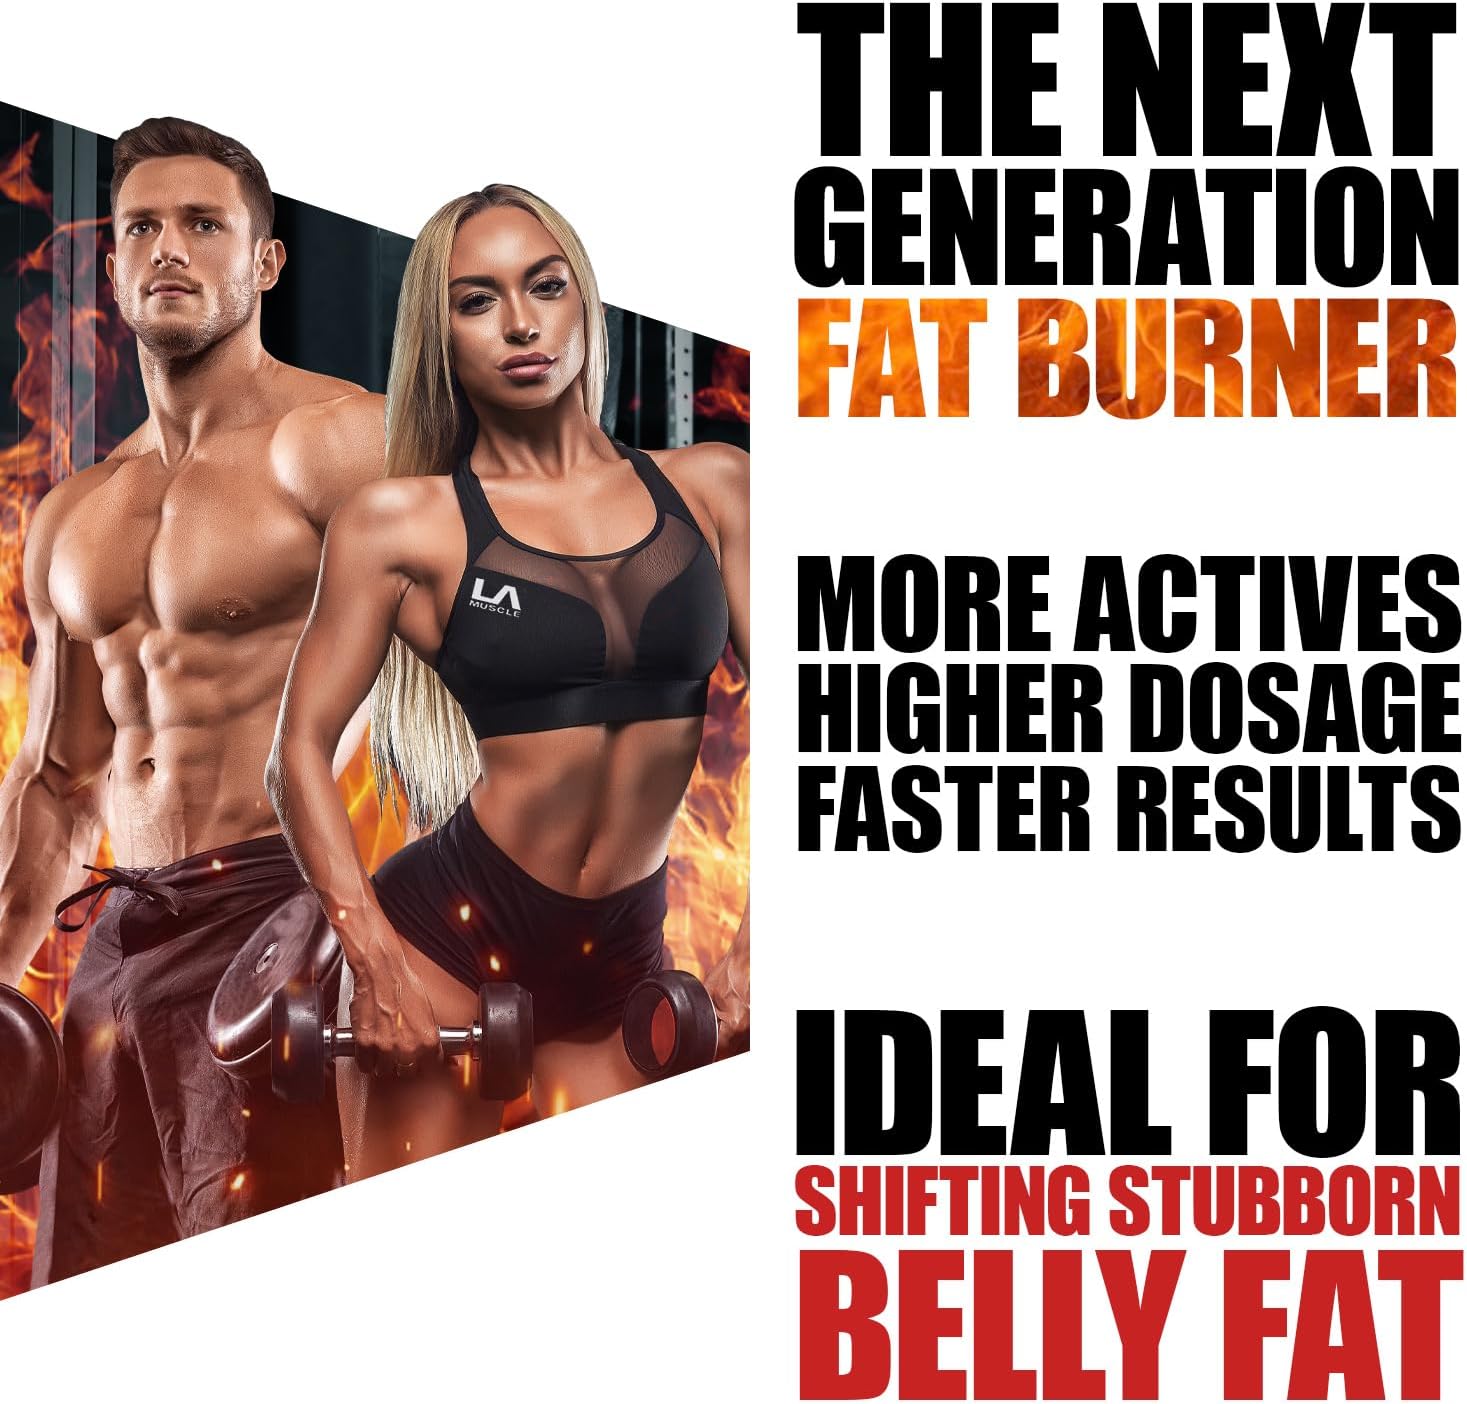 LA Muscle Burn Belly Fat Extreme - Extreme Belly Fat Burner